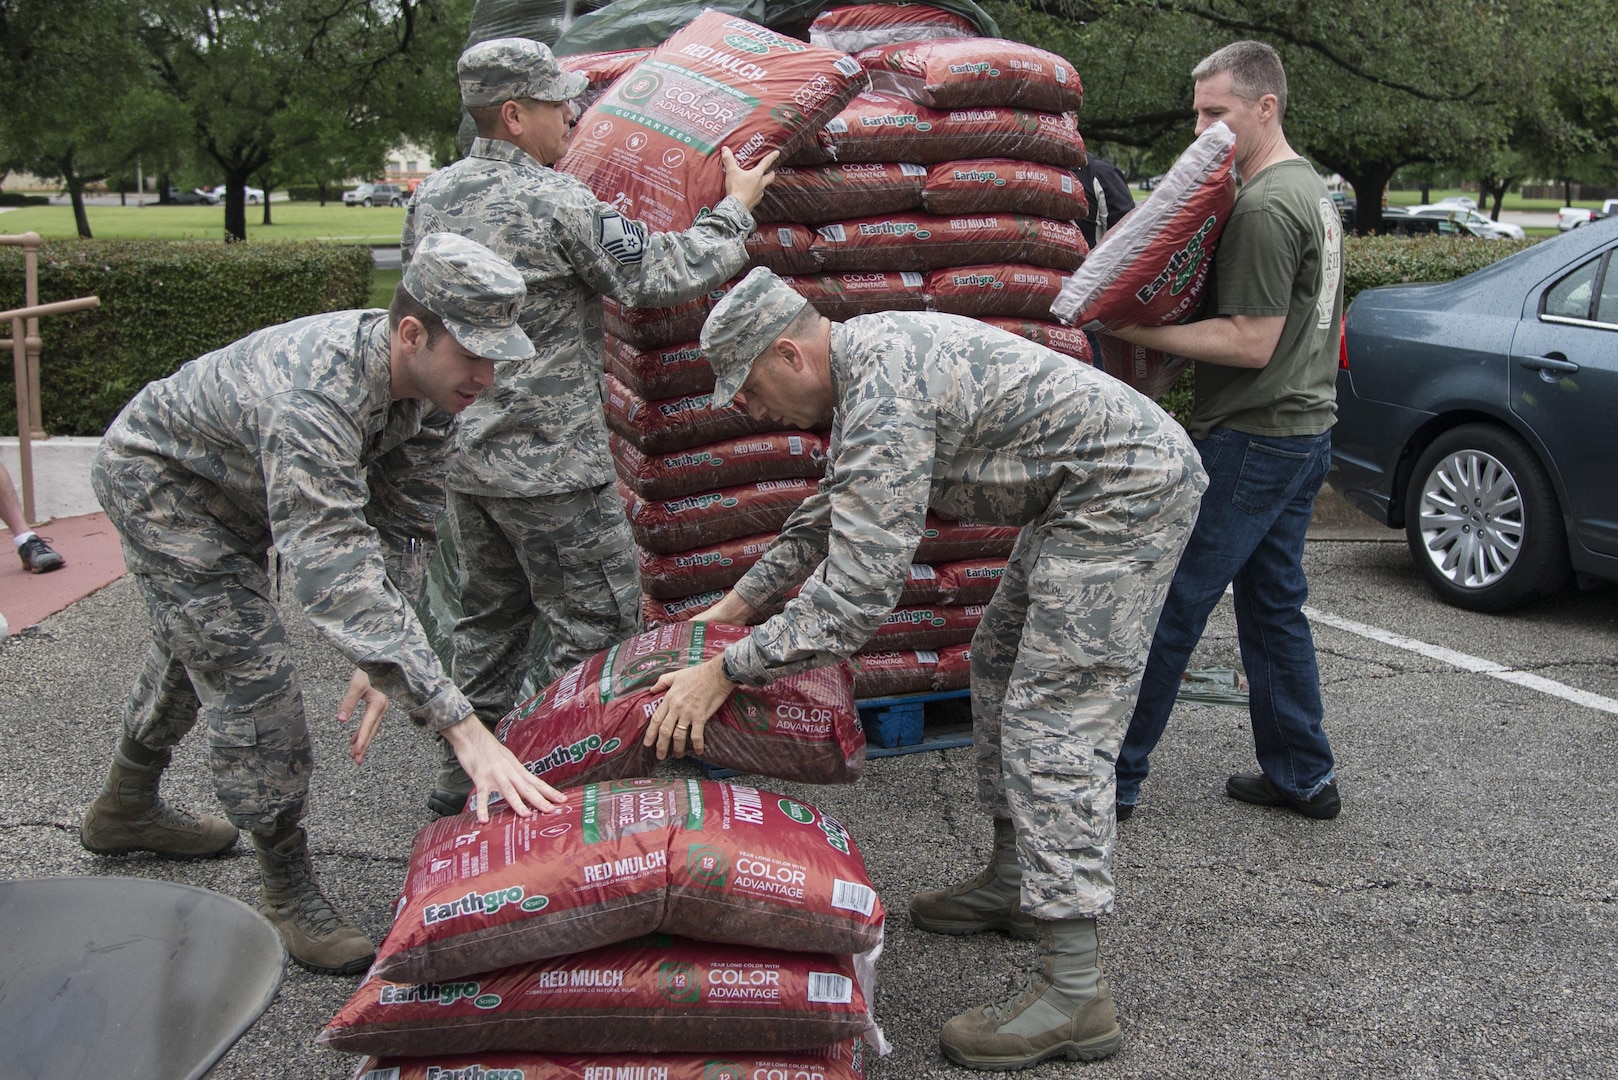 Members of the 502nd Security Forces and Logistics Support Group unload bags of mulch at the Taj during Proud Week April 13 at Joint Base San Antonio-Randolph. The 502nd Air Base Wing in coordination with the 502nd Civil Engineer Squadron conducted Proud Week Spring Cleanup to unite mission partners, tenant units, organizations and agencies throughout JBSA in an effort to enhance the appearance and beautification of JBSA and its facilities, conduct environmental maintenance and create a clean work environment.